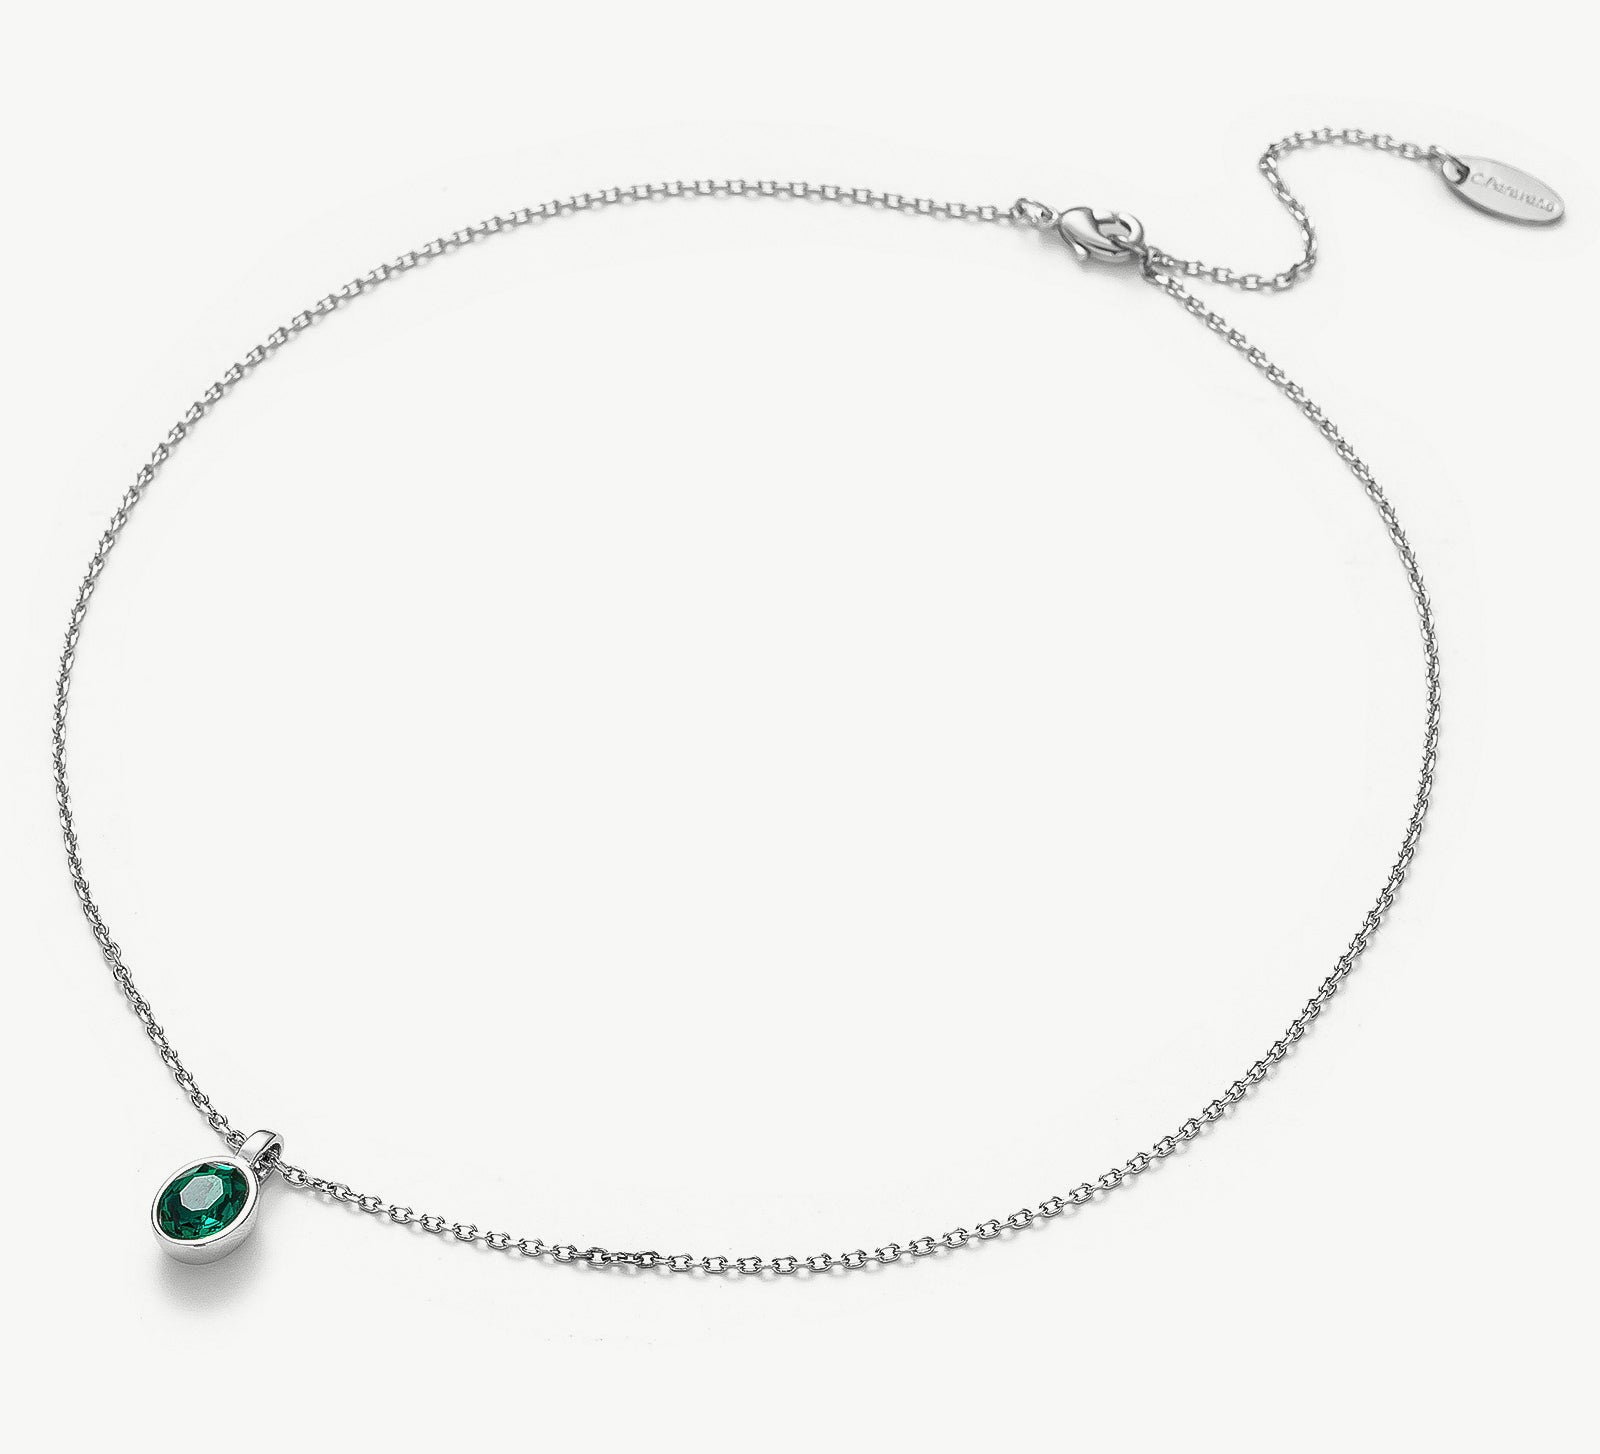 Agate Pendant Necklace in Emerald, a lush emerald charm captured in an agate pendant, creating a stylish and timeless accessory to add a pop of color to your ensemble